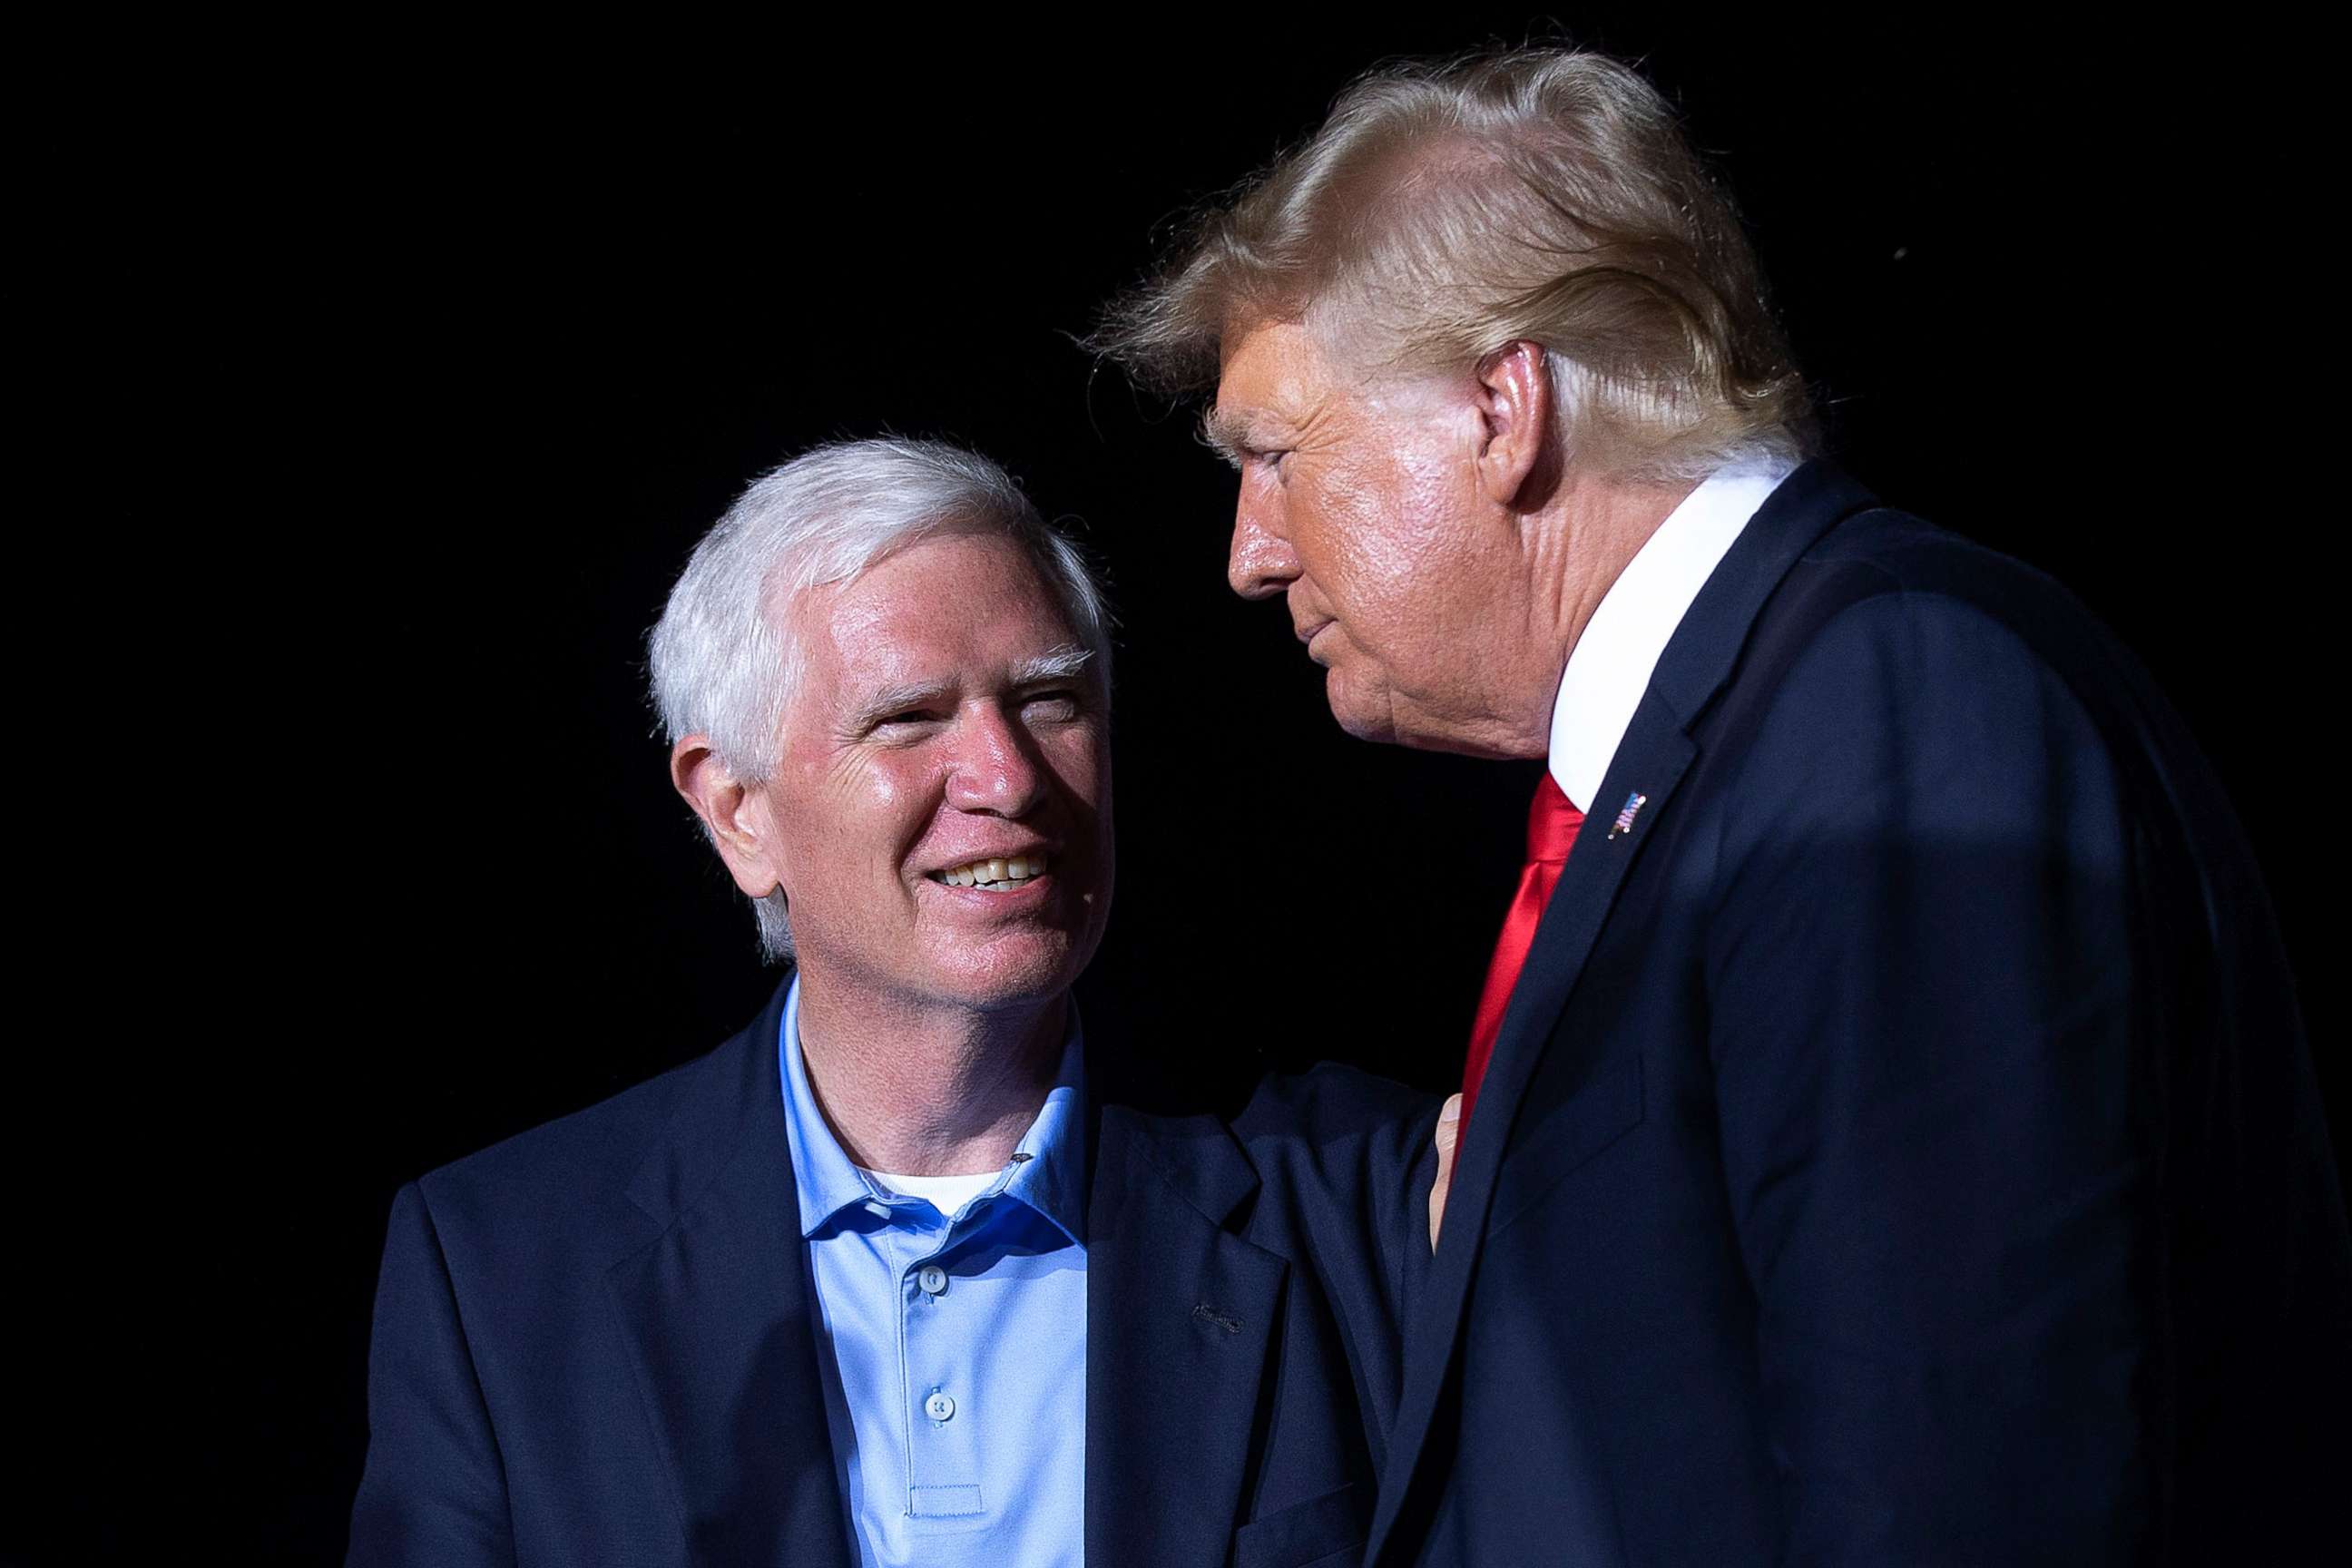 PHOTO: Former President Donald Trump welcomes Rep. Mo Brooks to the stage during a "Save America" rally at York Family Farms, Aug. 21, 2021, in Cullman, Alabama.